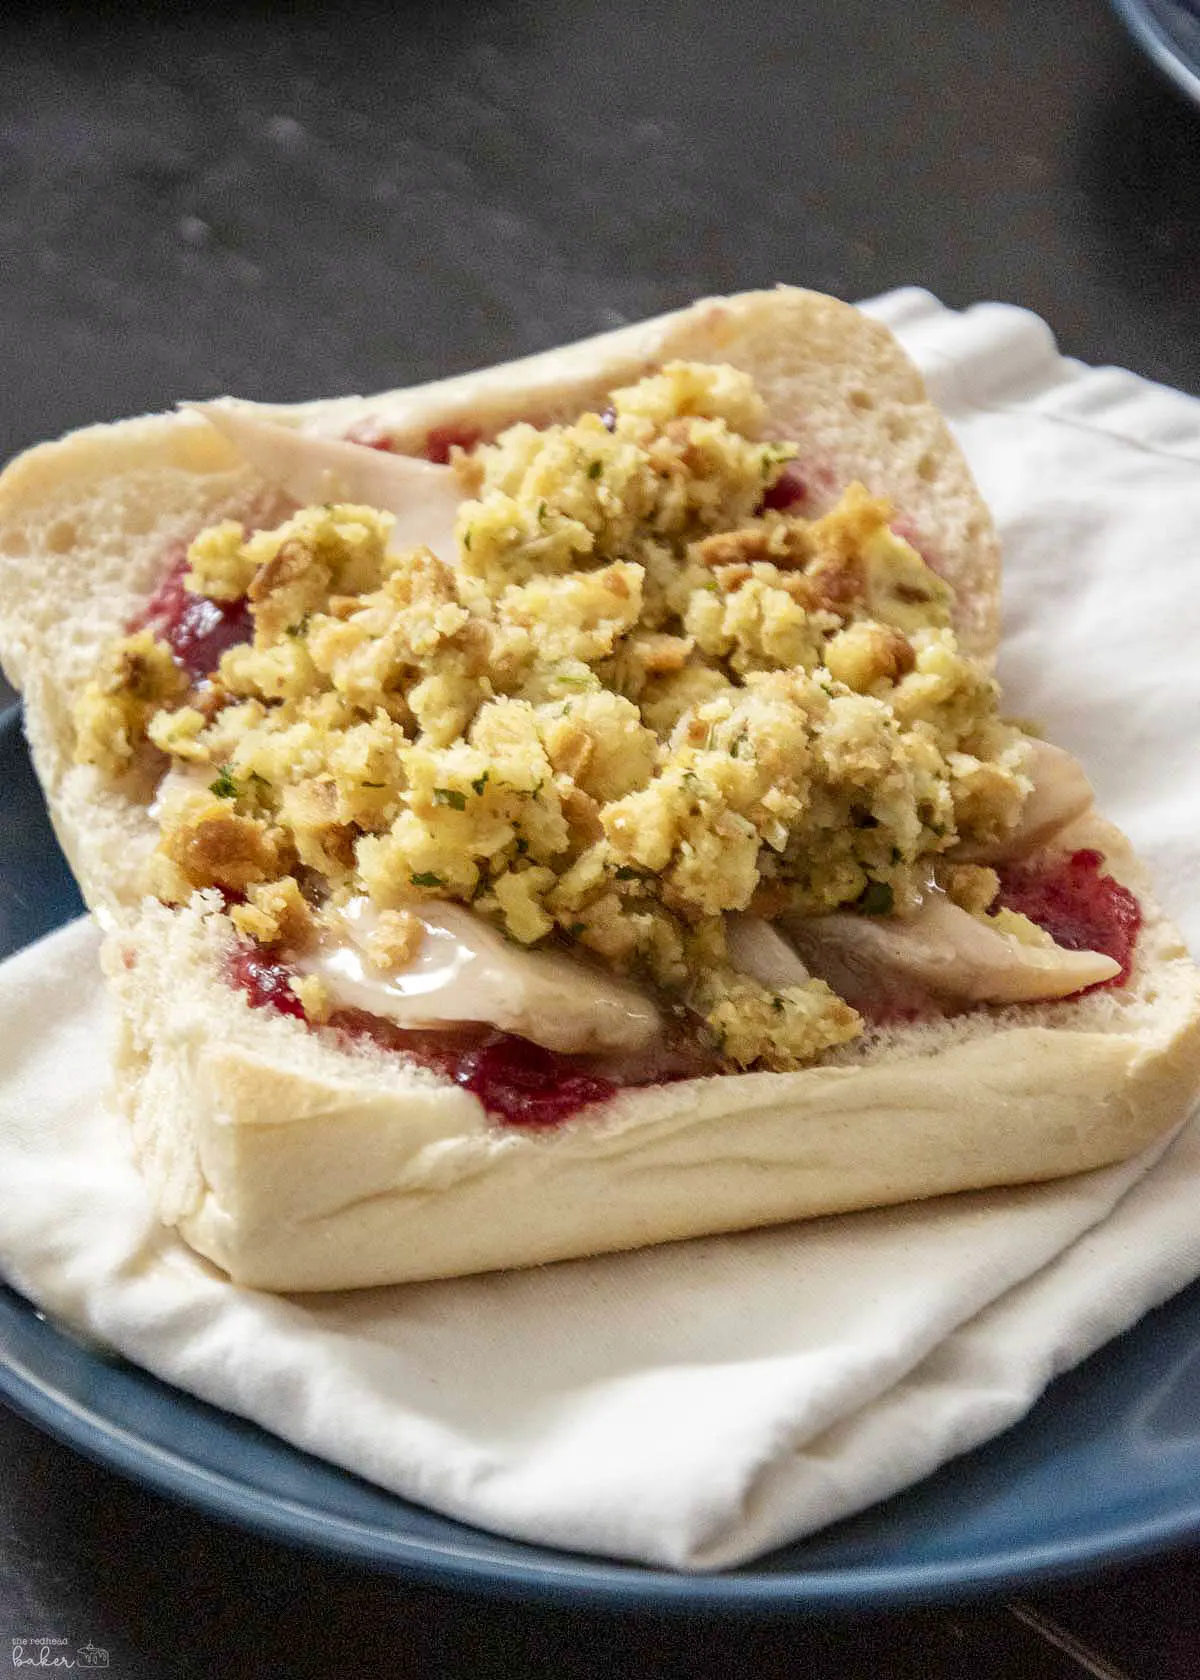 A Thanksgiving leftovers sandwich on a whtie napkin.